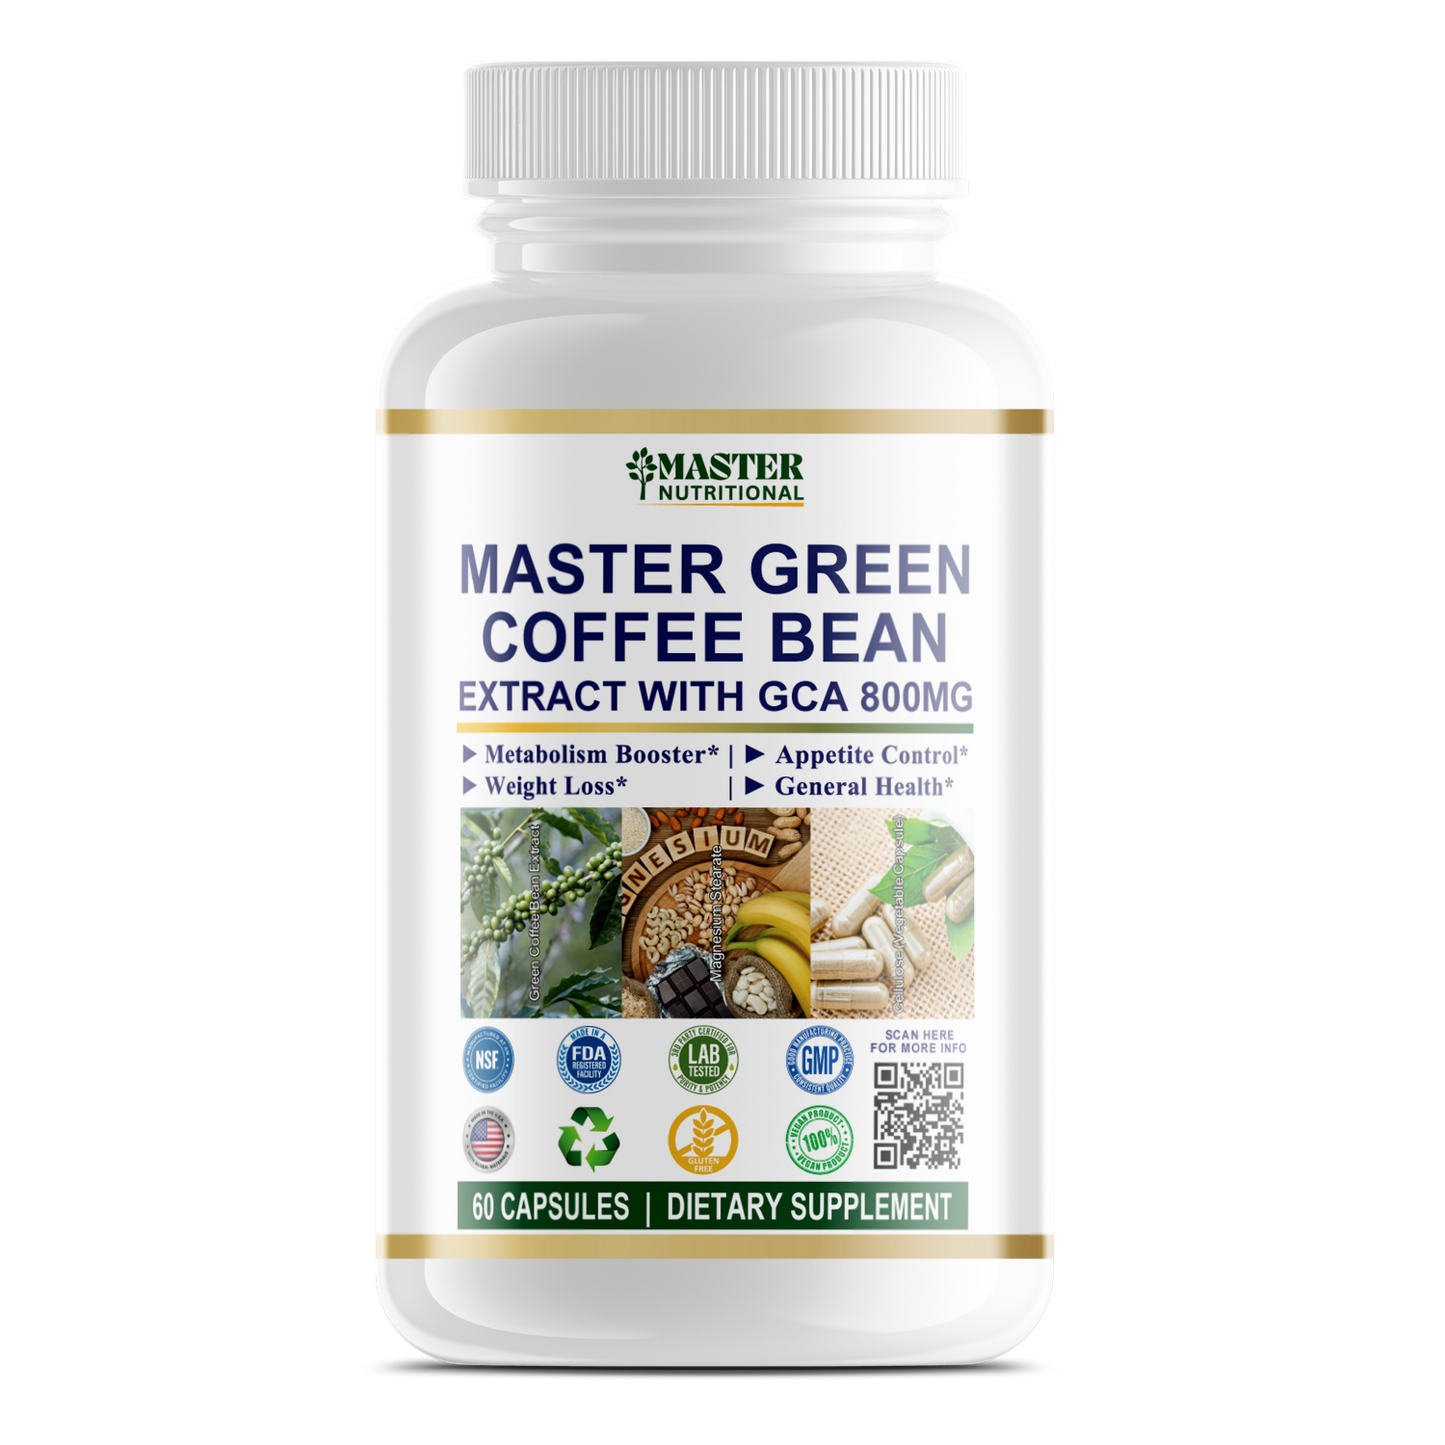 Master Green Coffee Bean Extract-Power of Green Coffee Antioxidants for Optimal Health